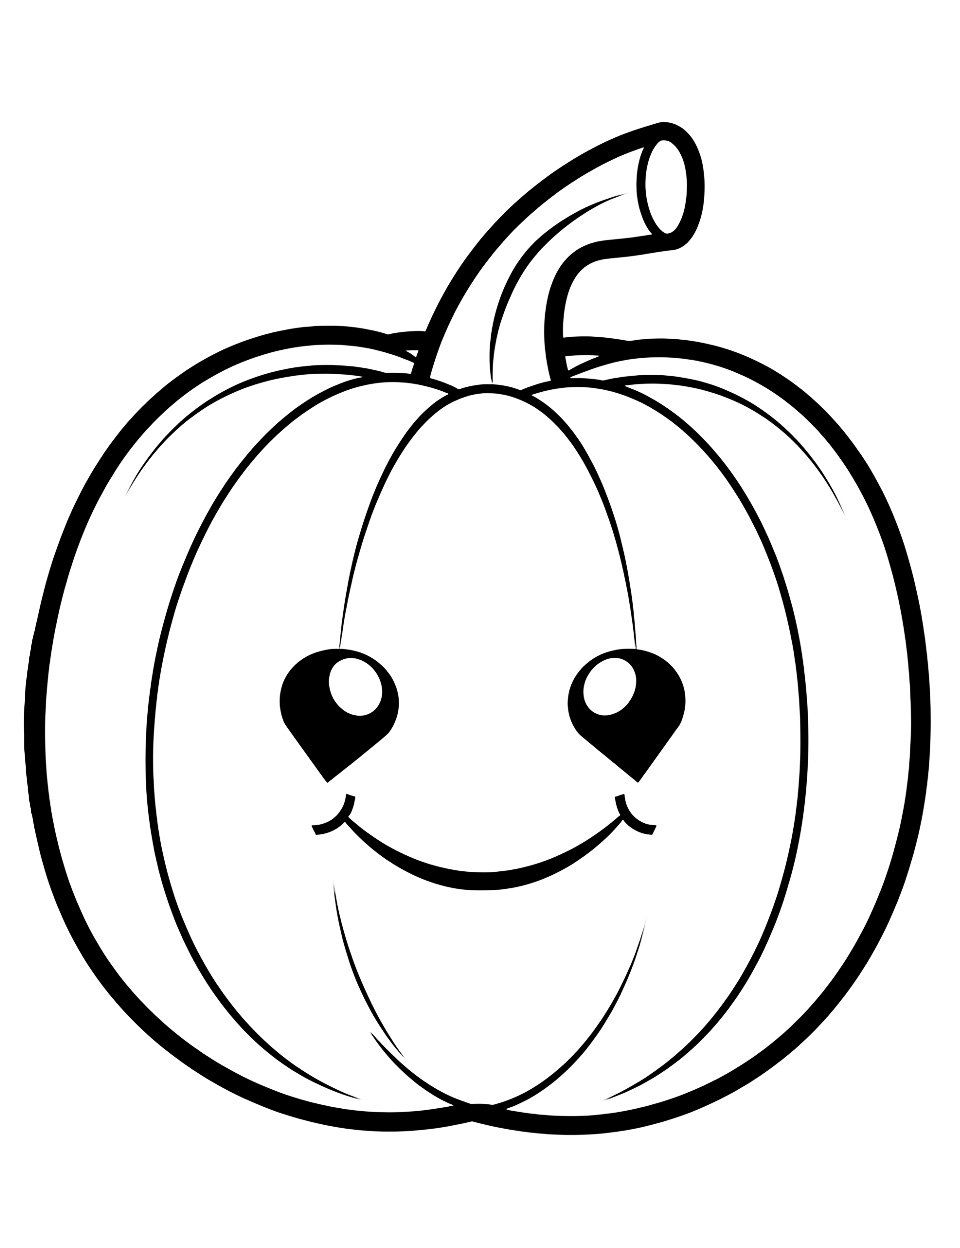 Pumpkin coloring pages for kids free printables pumpkin coloring pages free halloween coloring pages pumpkin coloring sheet